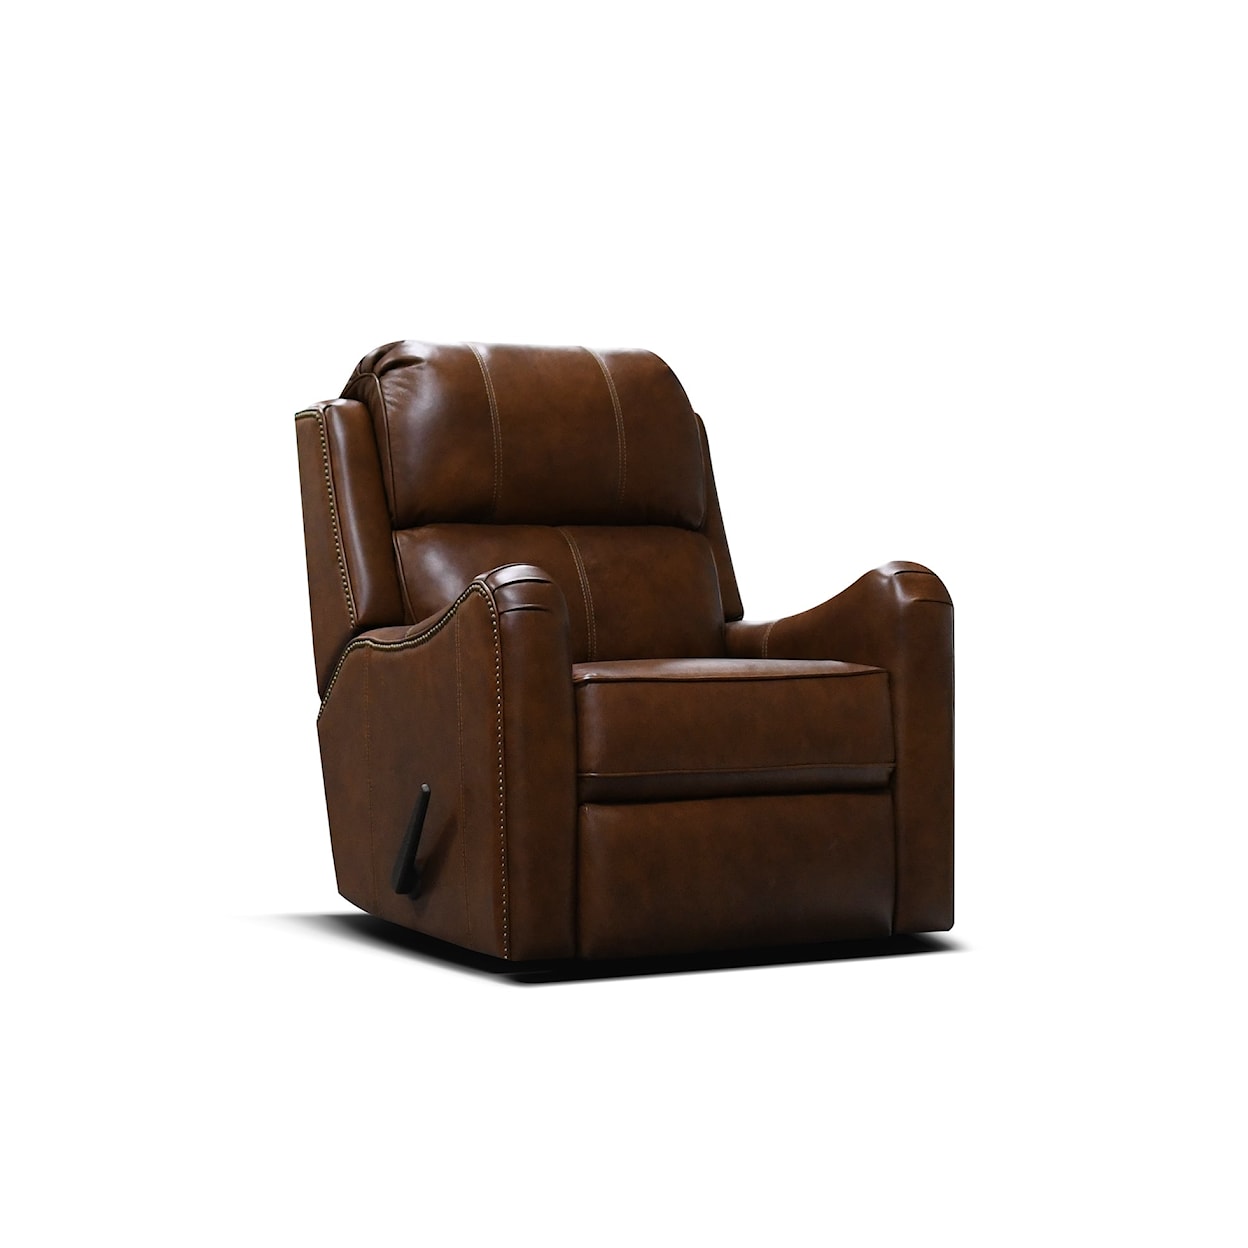 England EZ2G00/AL/N Series Leather Wall Saver Recliner with Nailheads